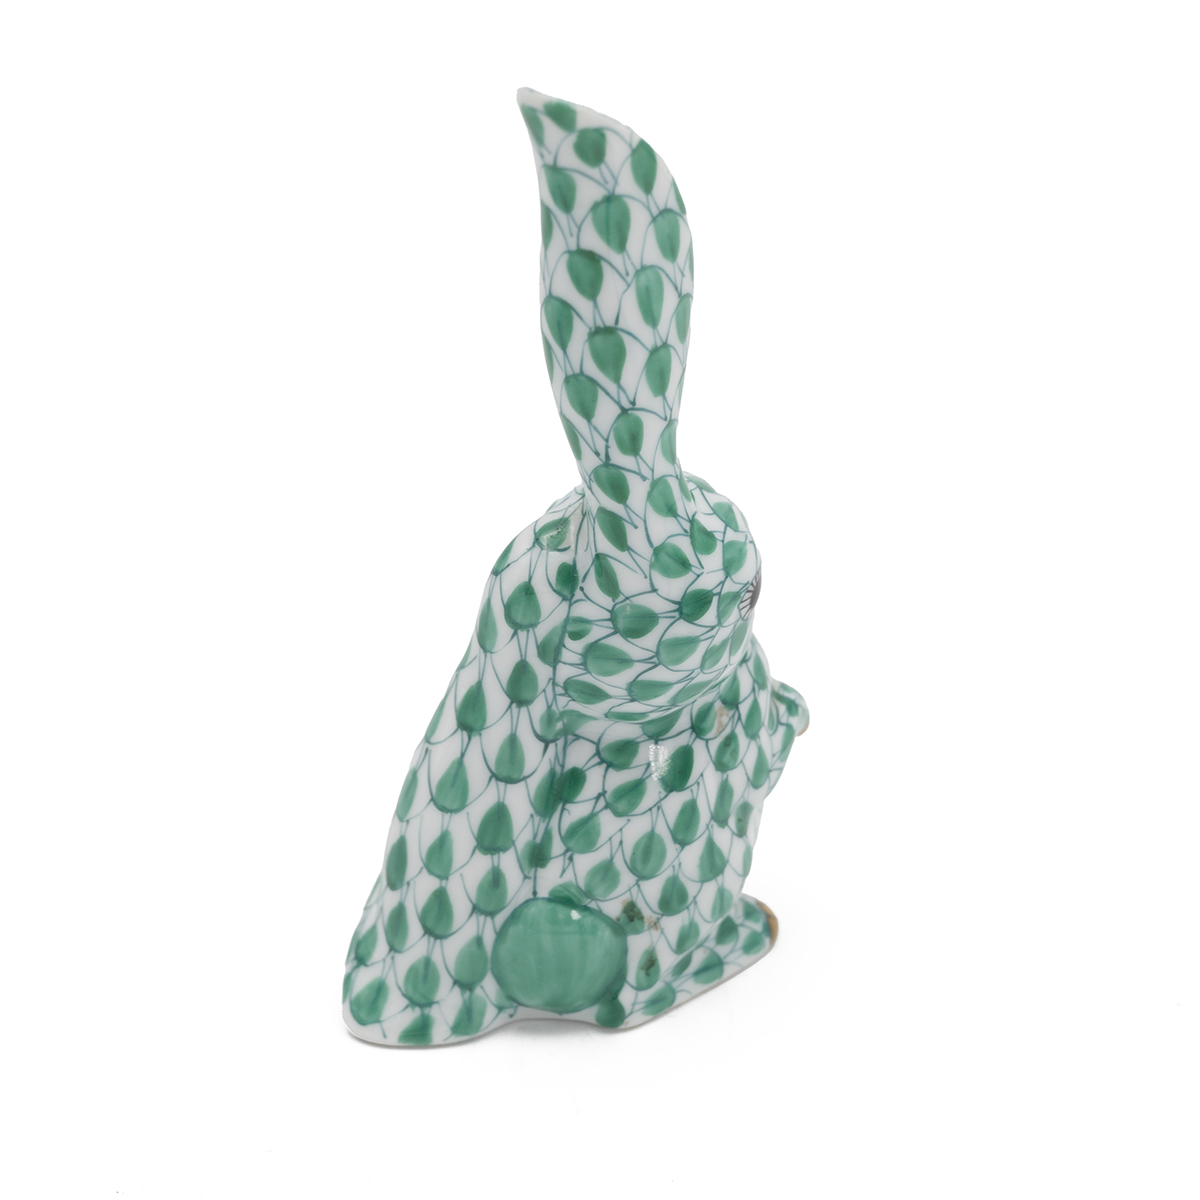 Herend - "Funny Rabbit" in Vieux Herend green fishnet with gilt highlights. Printed Herend crest ... - Image 2 of 3